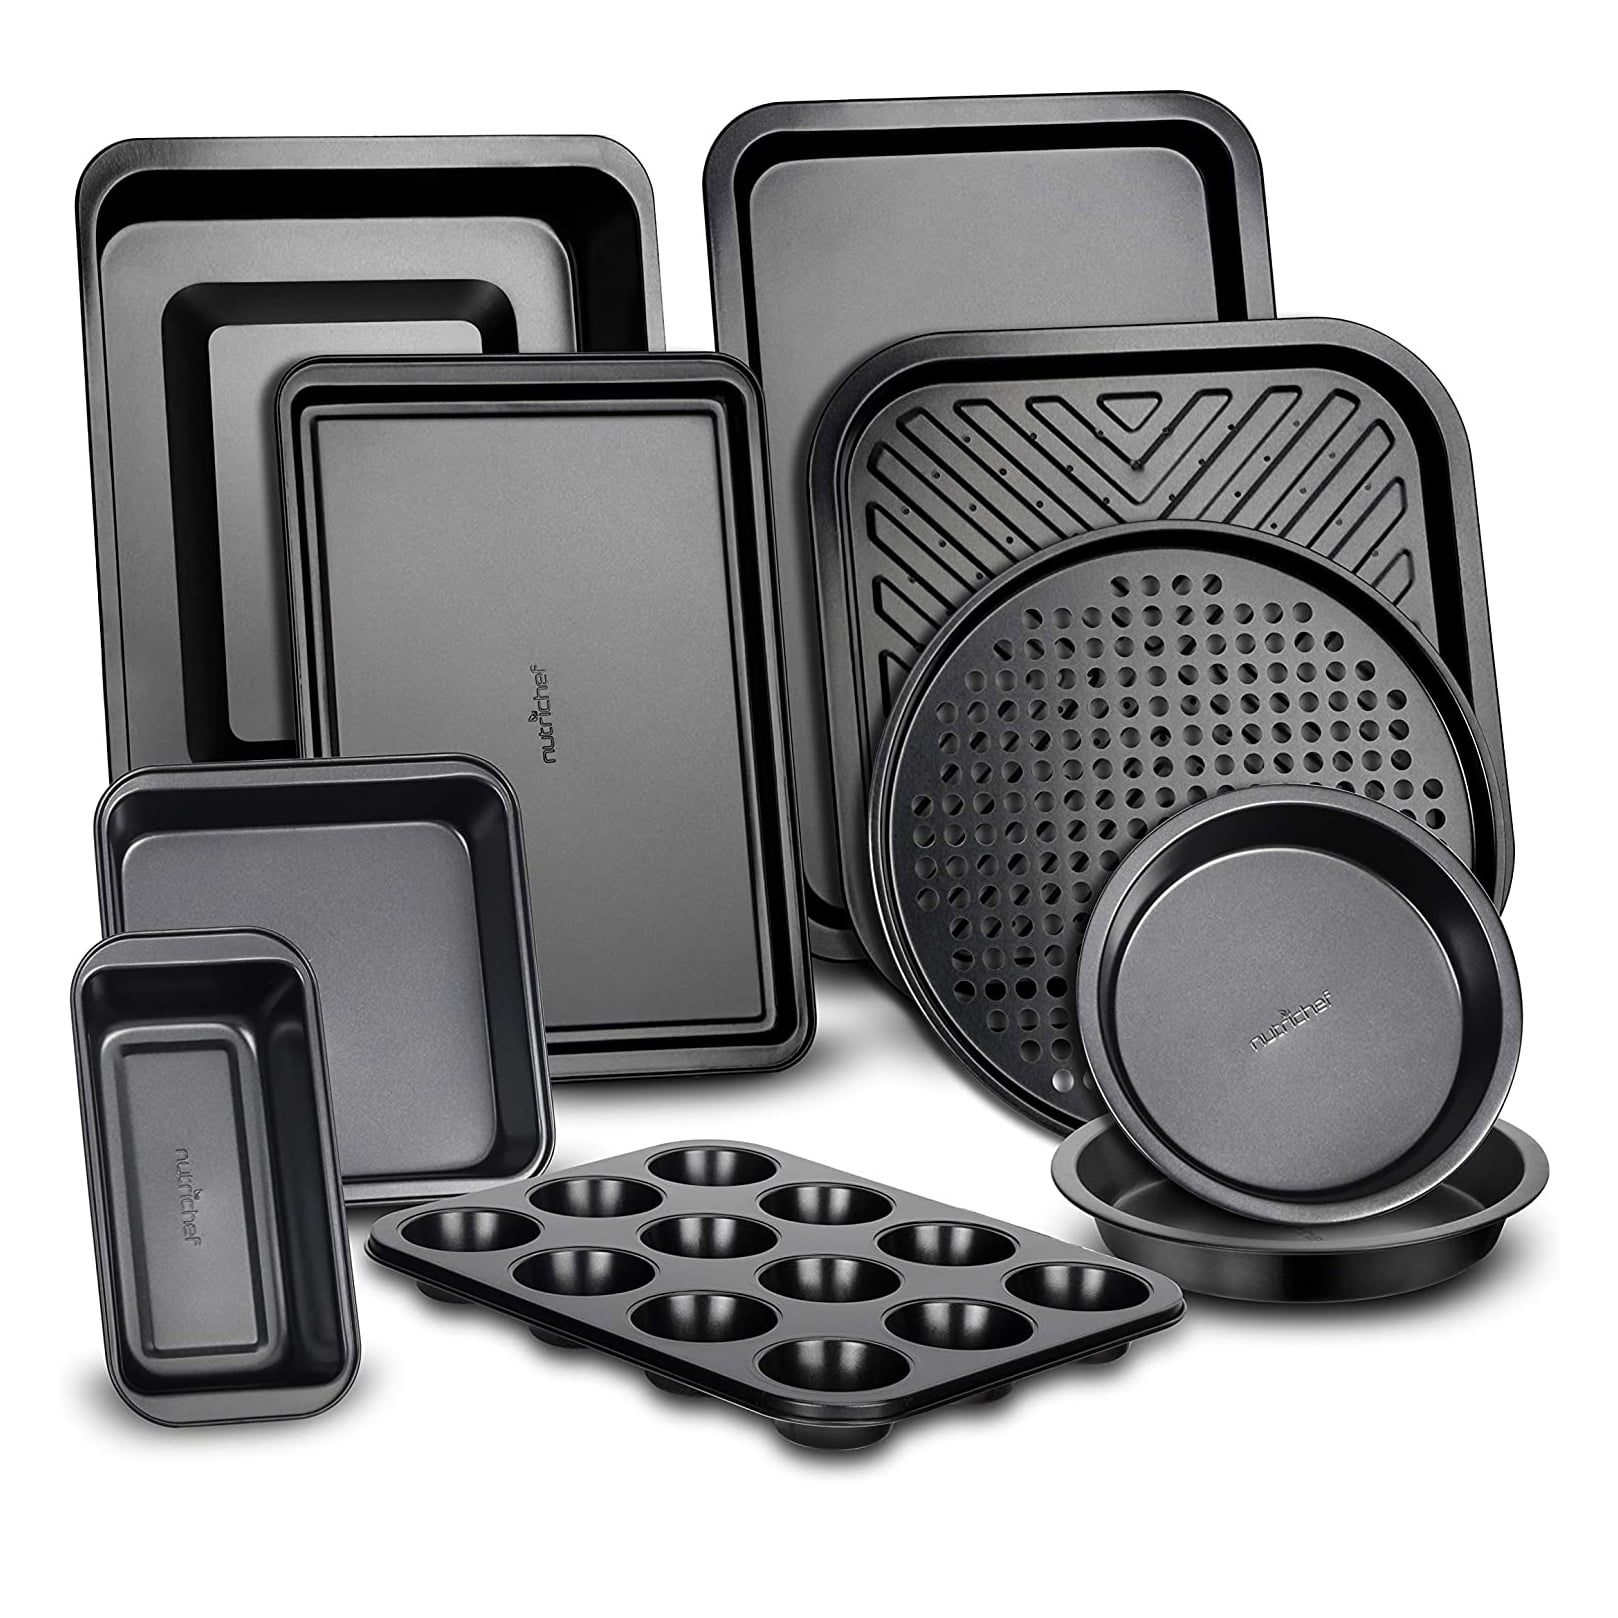 Martha Stewart Collection Pro 5-Pc. Nonstick Bakeware, Created for Macy's